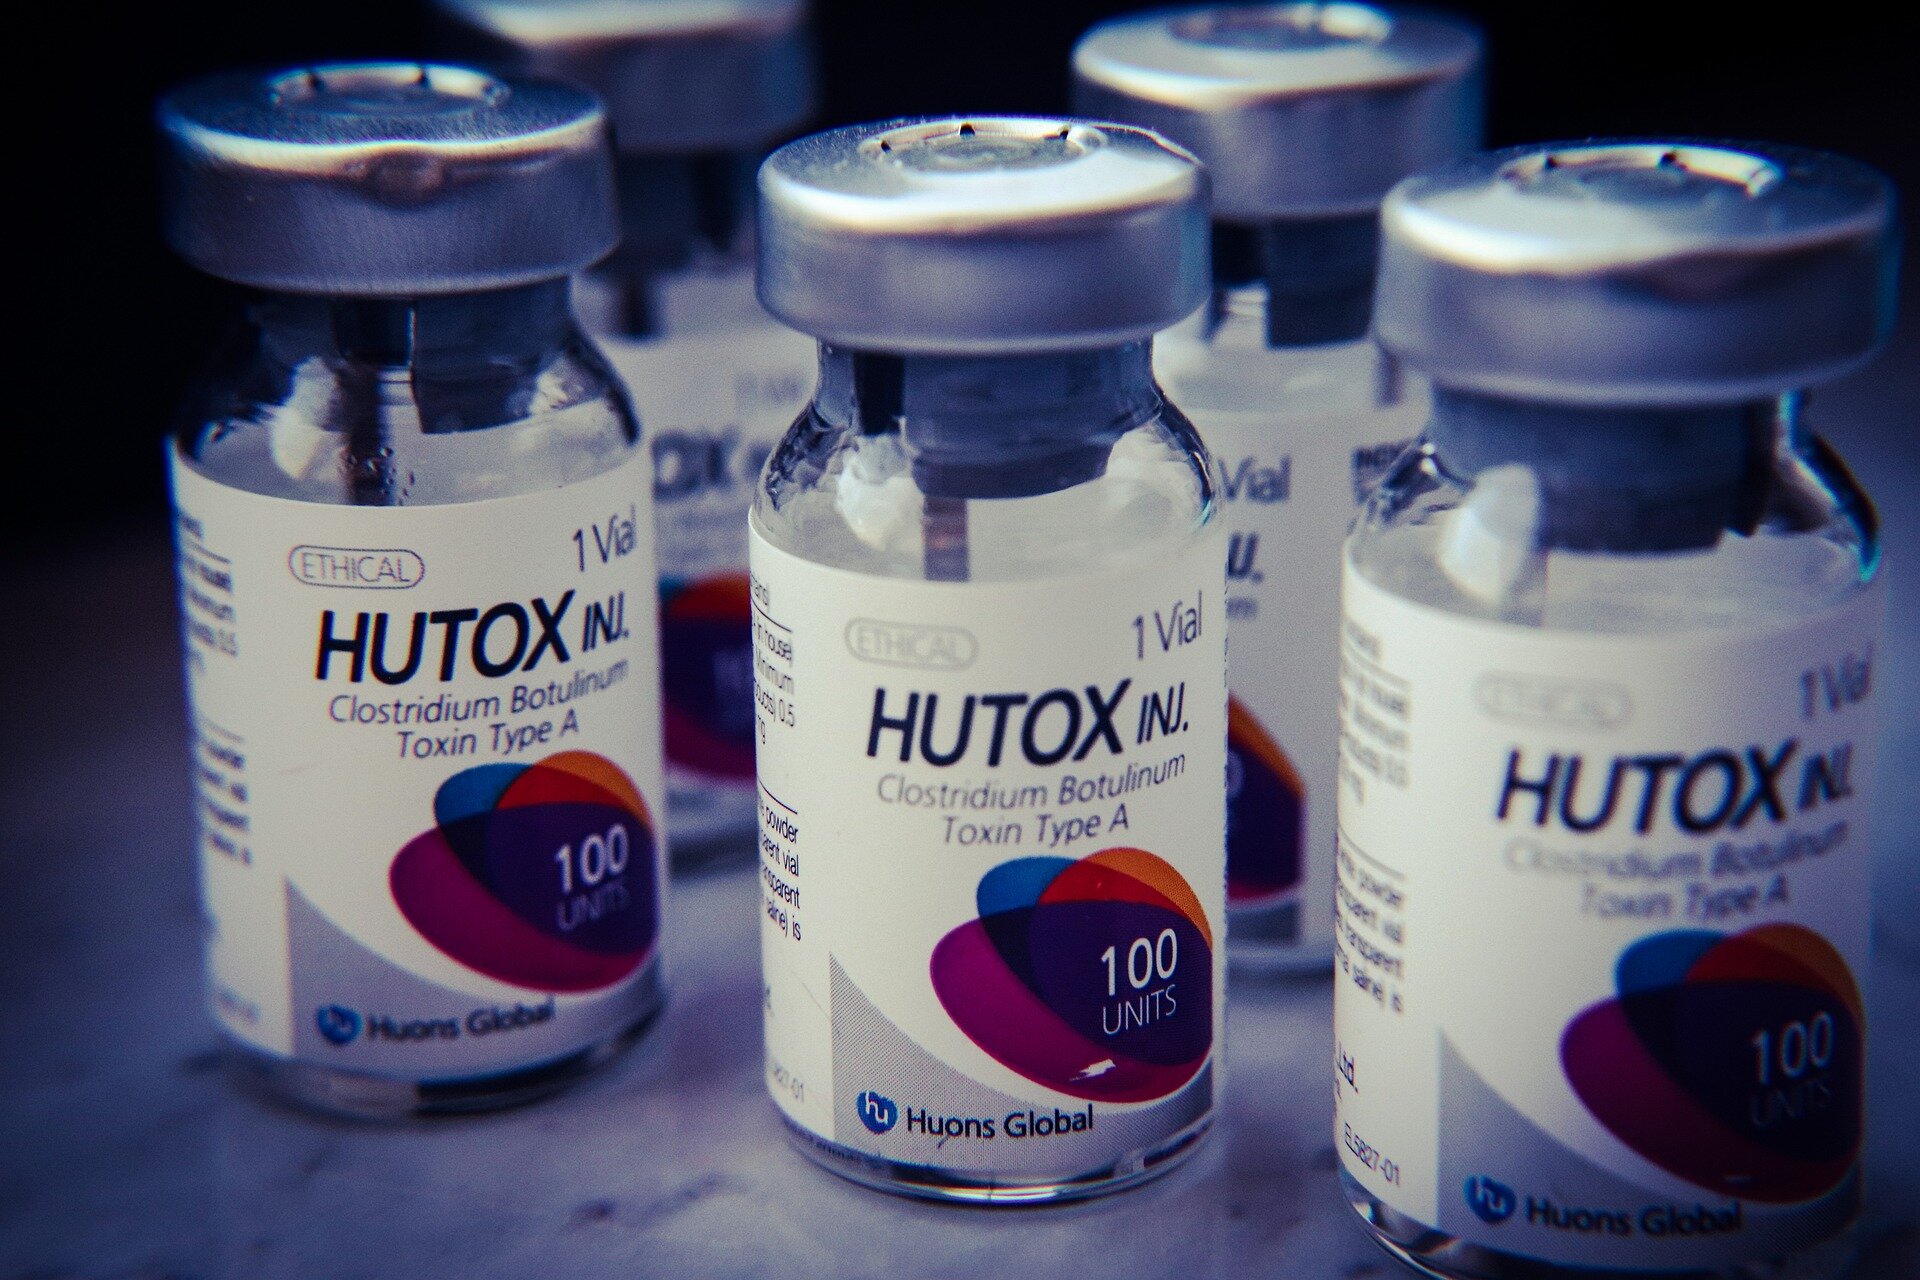 Counterfeit Botox Injections Alert Issued by US Health Officials